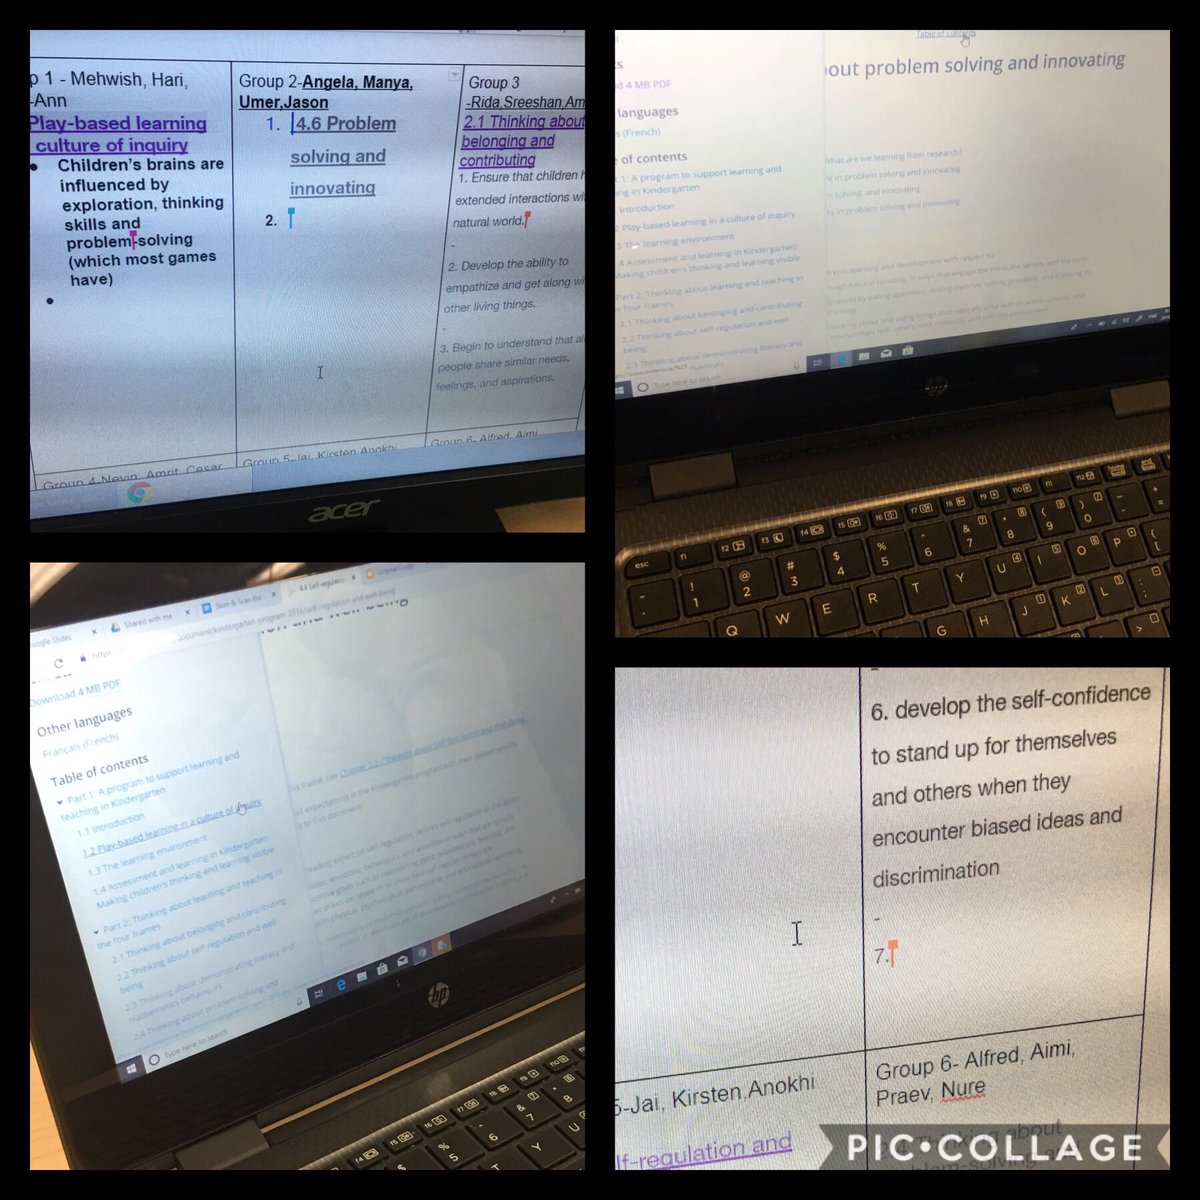 Grade 8s @FallingbrookMS take deep dive into #KindergartenProgram to ensure our @DigitalPromise #PlayToLearn games meet learning goals for our collaborative work with @EdenrosePS @meadvillps & @sherwoodmillsps #EarlyYears #peel21st #collaboration